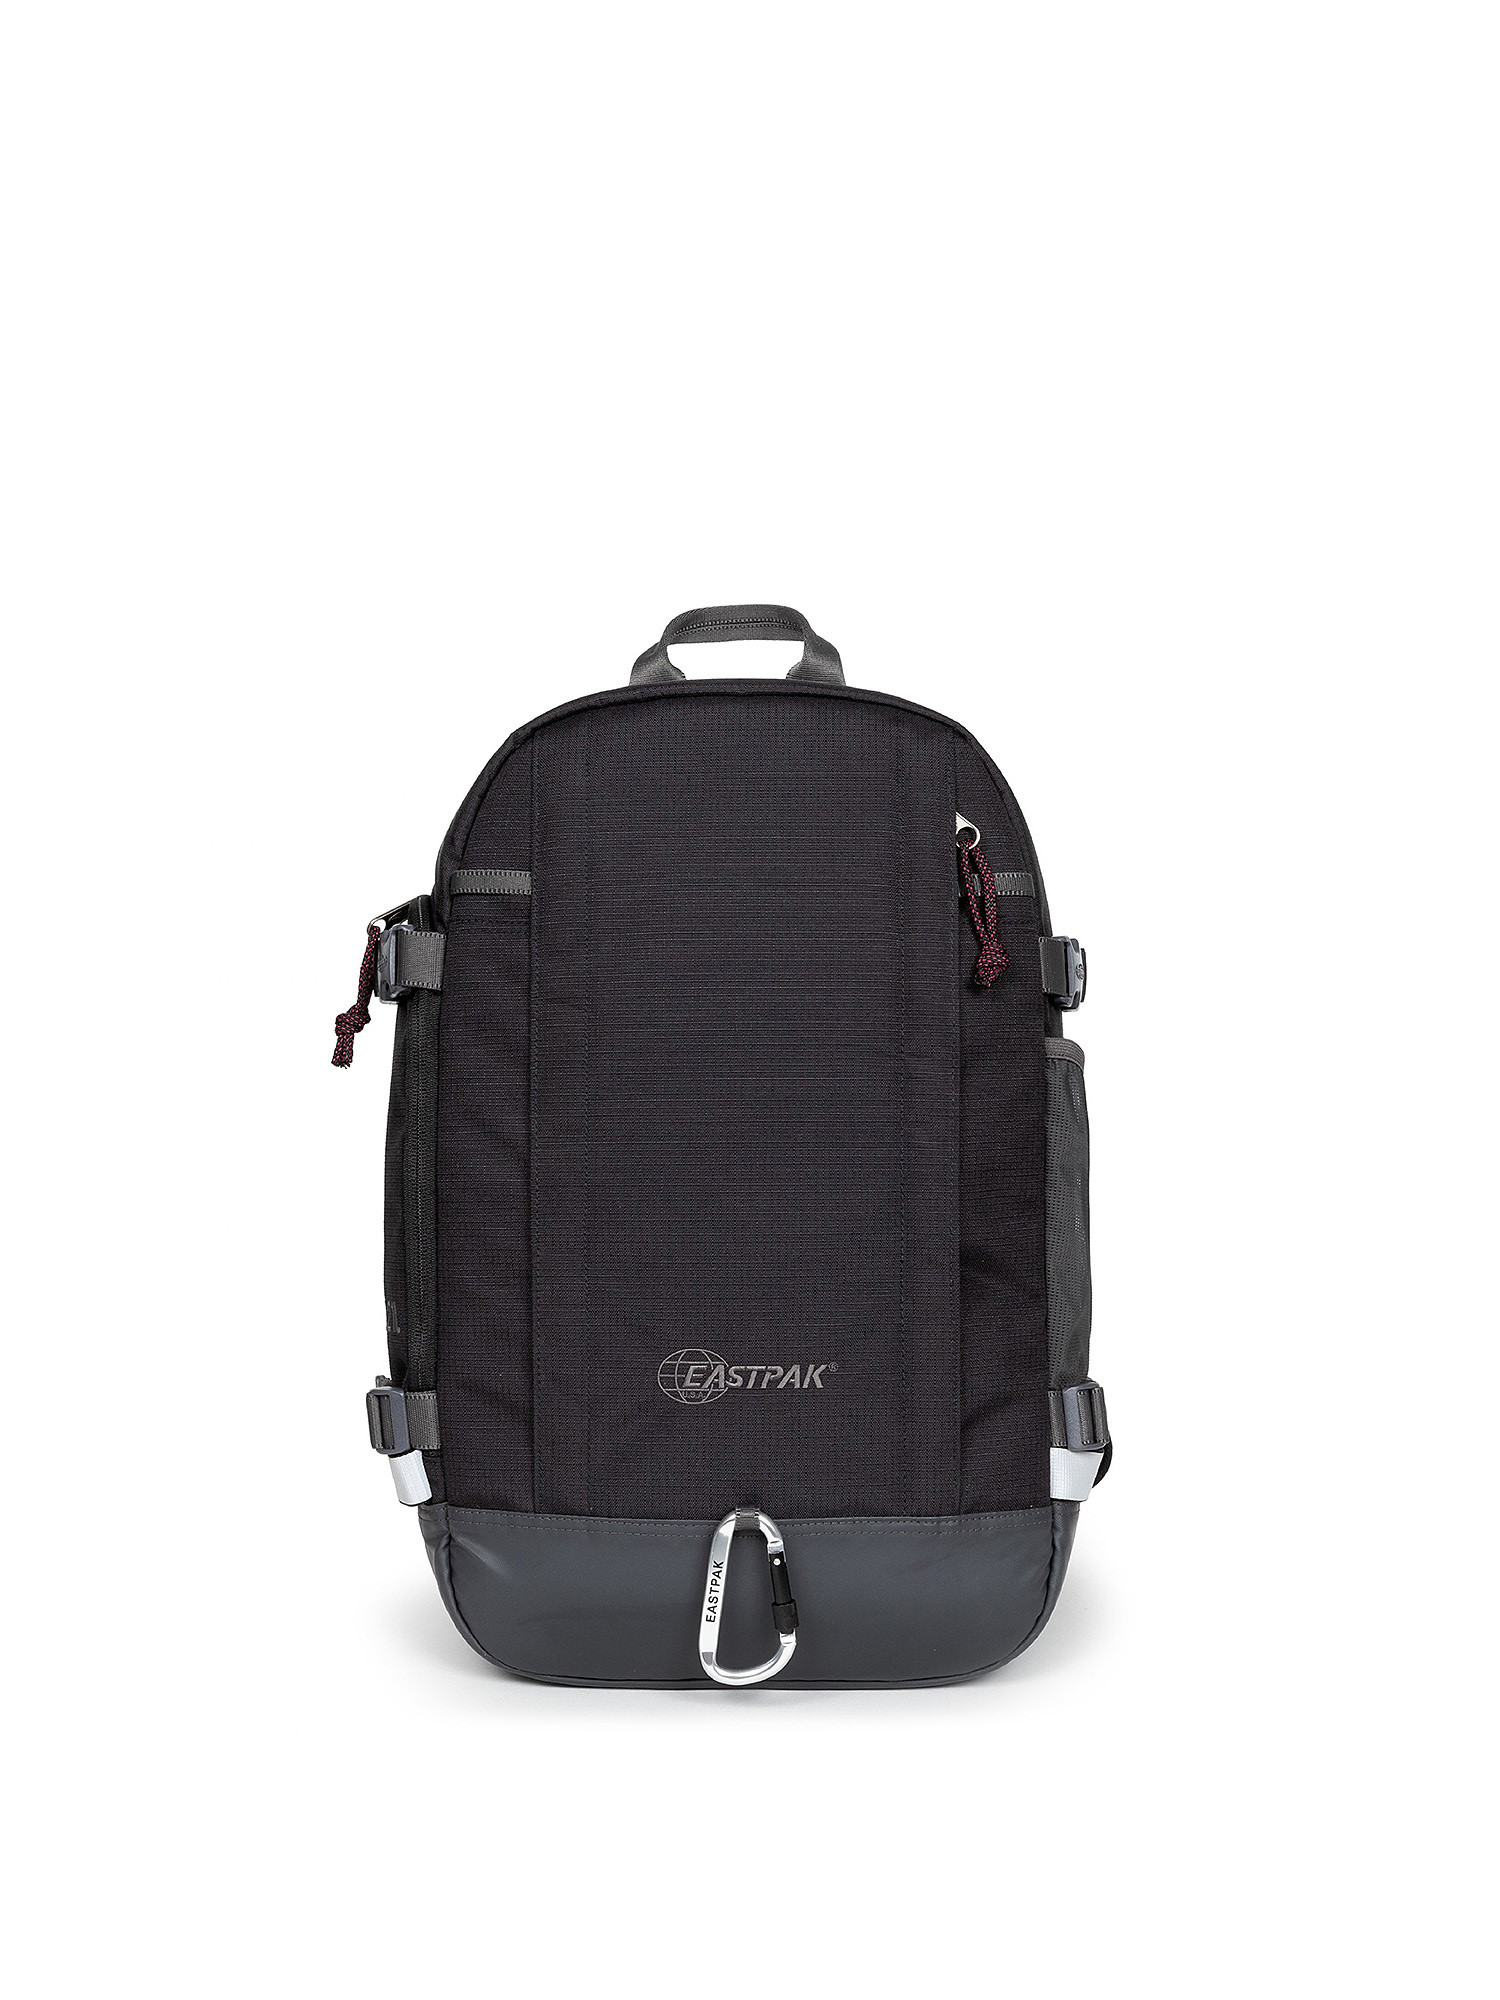 Eastpak - Zaino Out Safepack Out Black, Nero, large image number 0